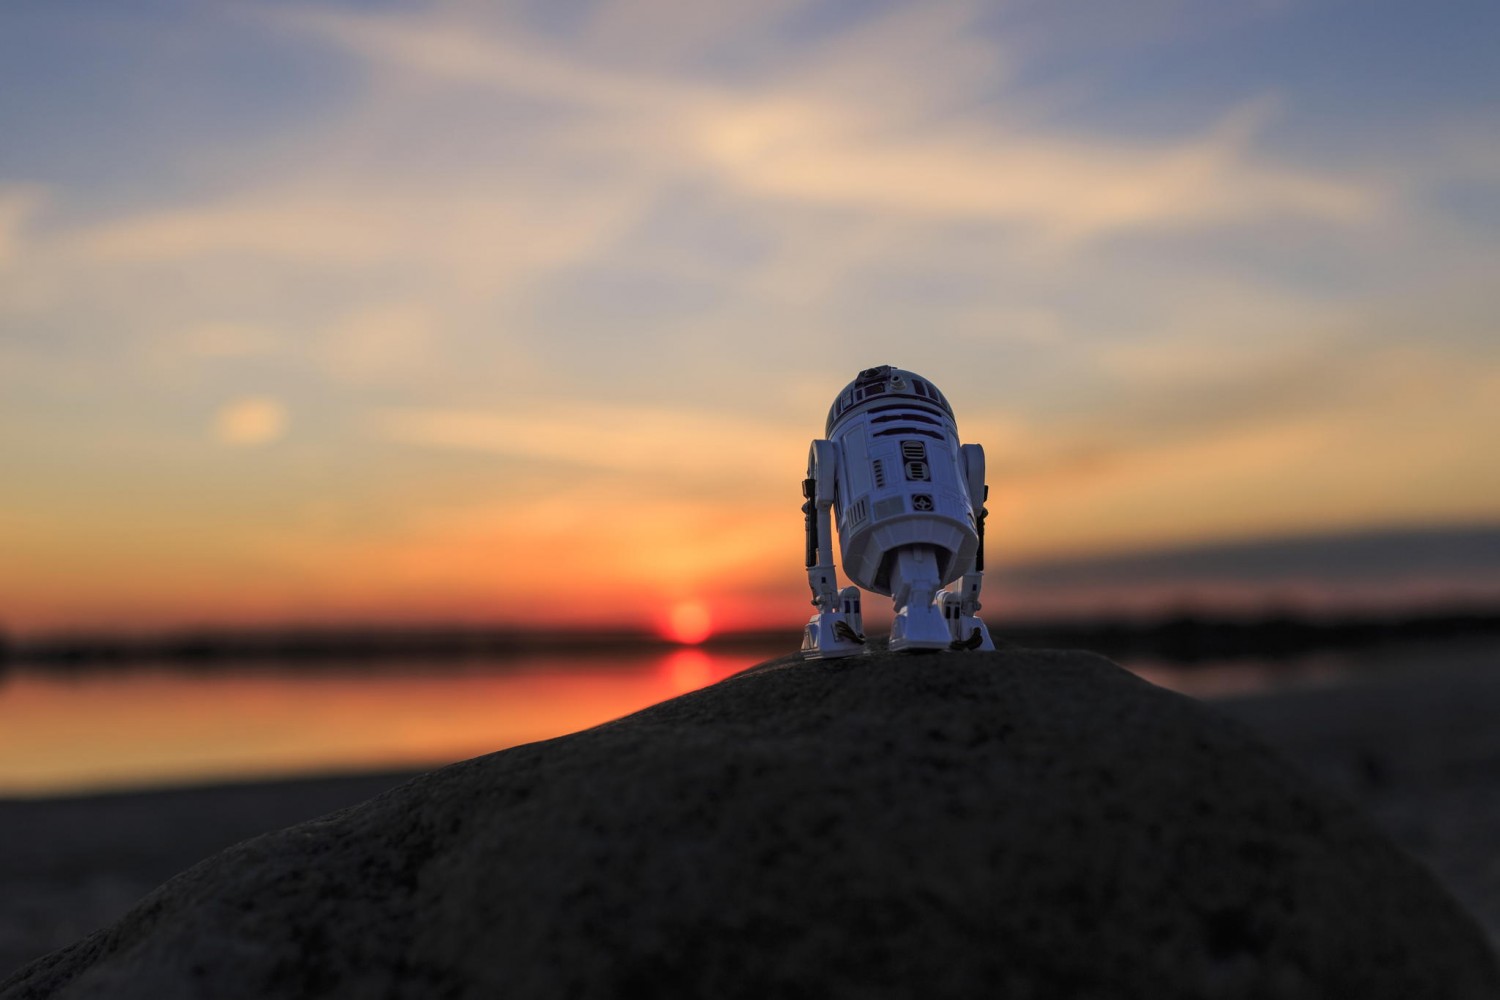 25 Reimagined Images Of R2-D2 Wandering The World Alone